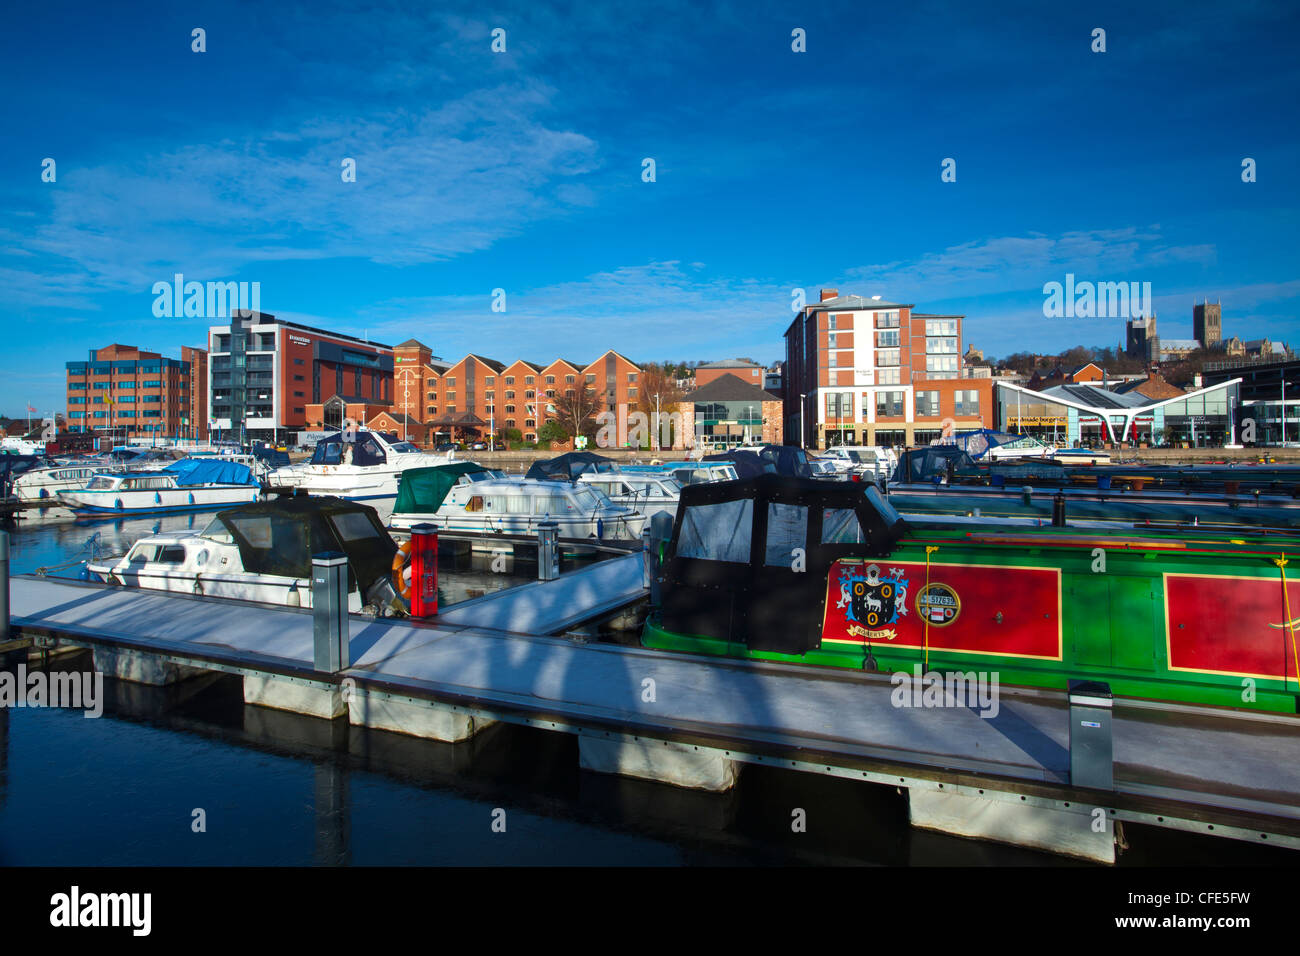 England, Lincolnshire, Lincoln. Brayford Quays, a waterfront development in the City of Lincoln located on the Brayford Pool. Stock Photo